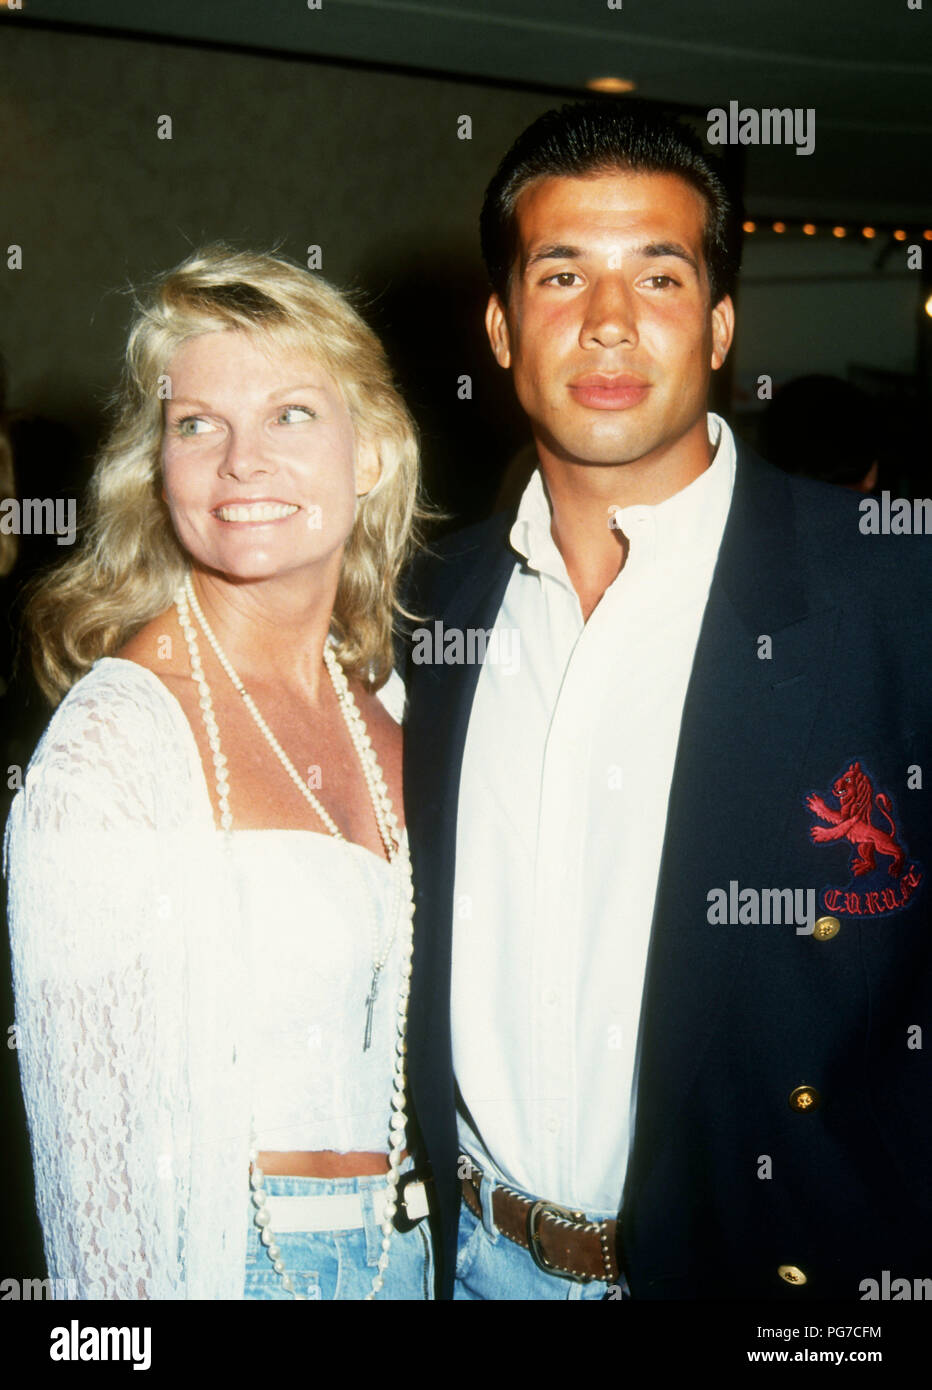 WESTWOOD, CA - AUGUST 03: Actress Cathy Lee Crosby and guest attend Warner  Bros. Pictures 'Unforgiven' Westwood Premiere on August 3, 1992 at Mann's  Bruin Theatre in Westwood, California. Photo by Barry